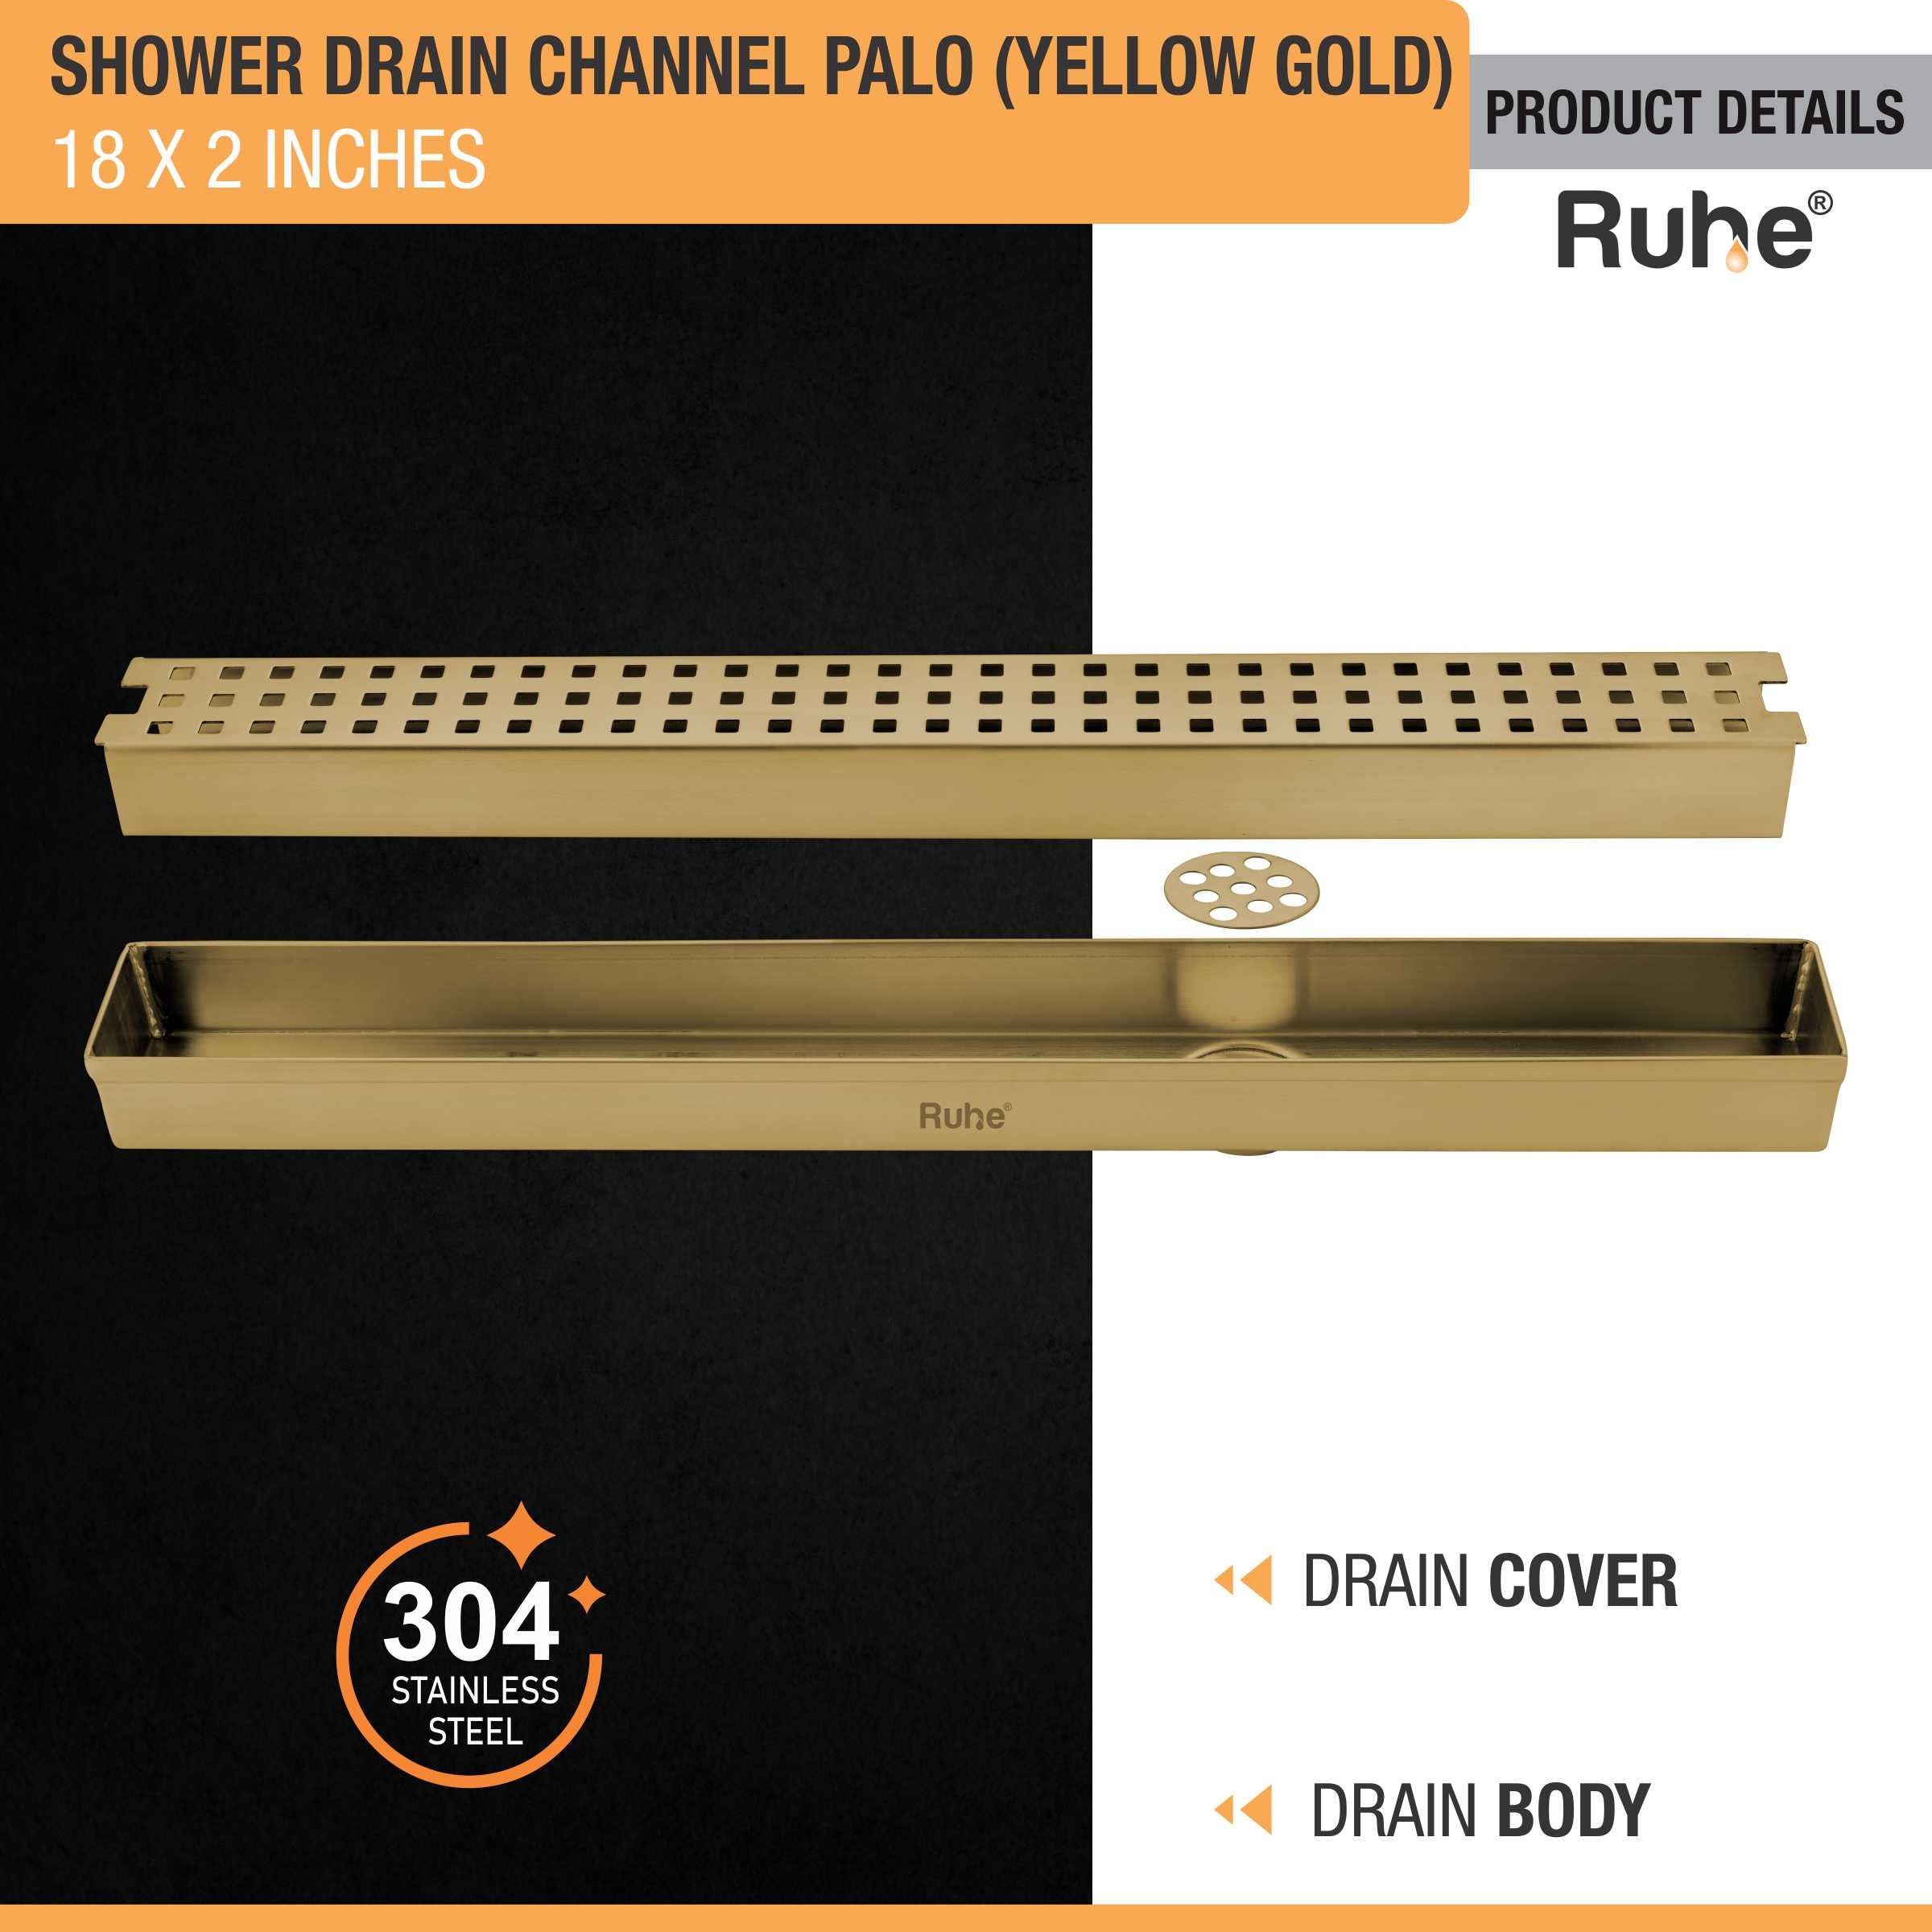 Palo Shower Drain Channel (18 x 2 Inches) YELLOW GOLD product details